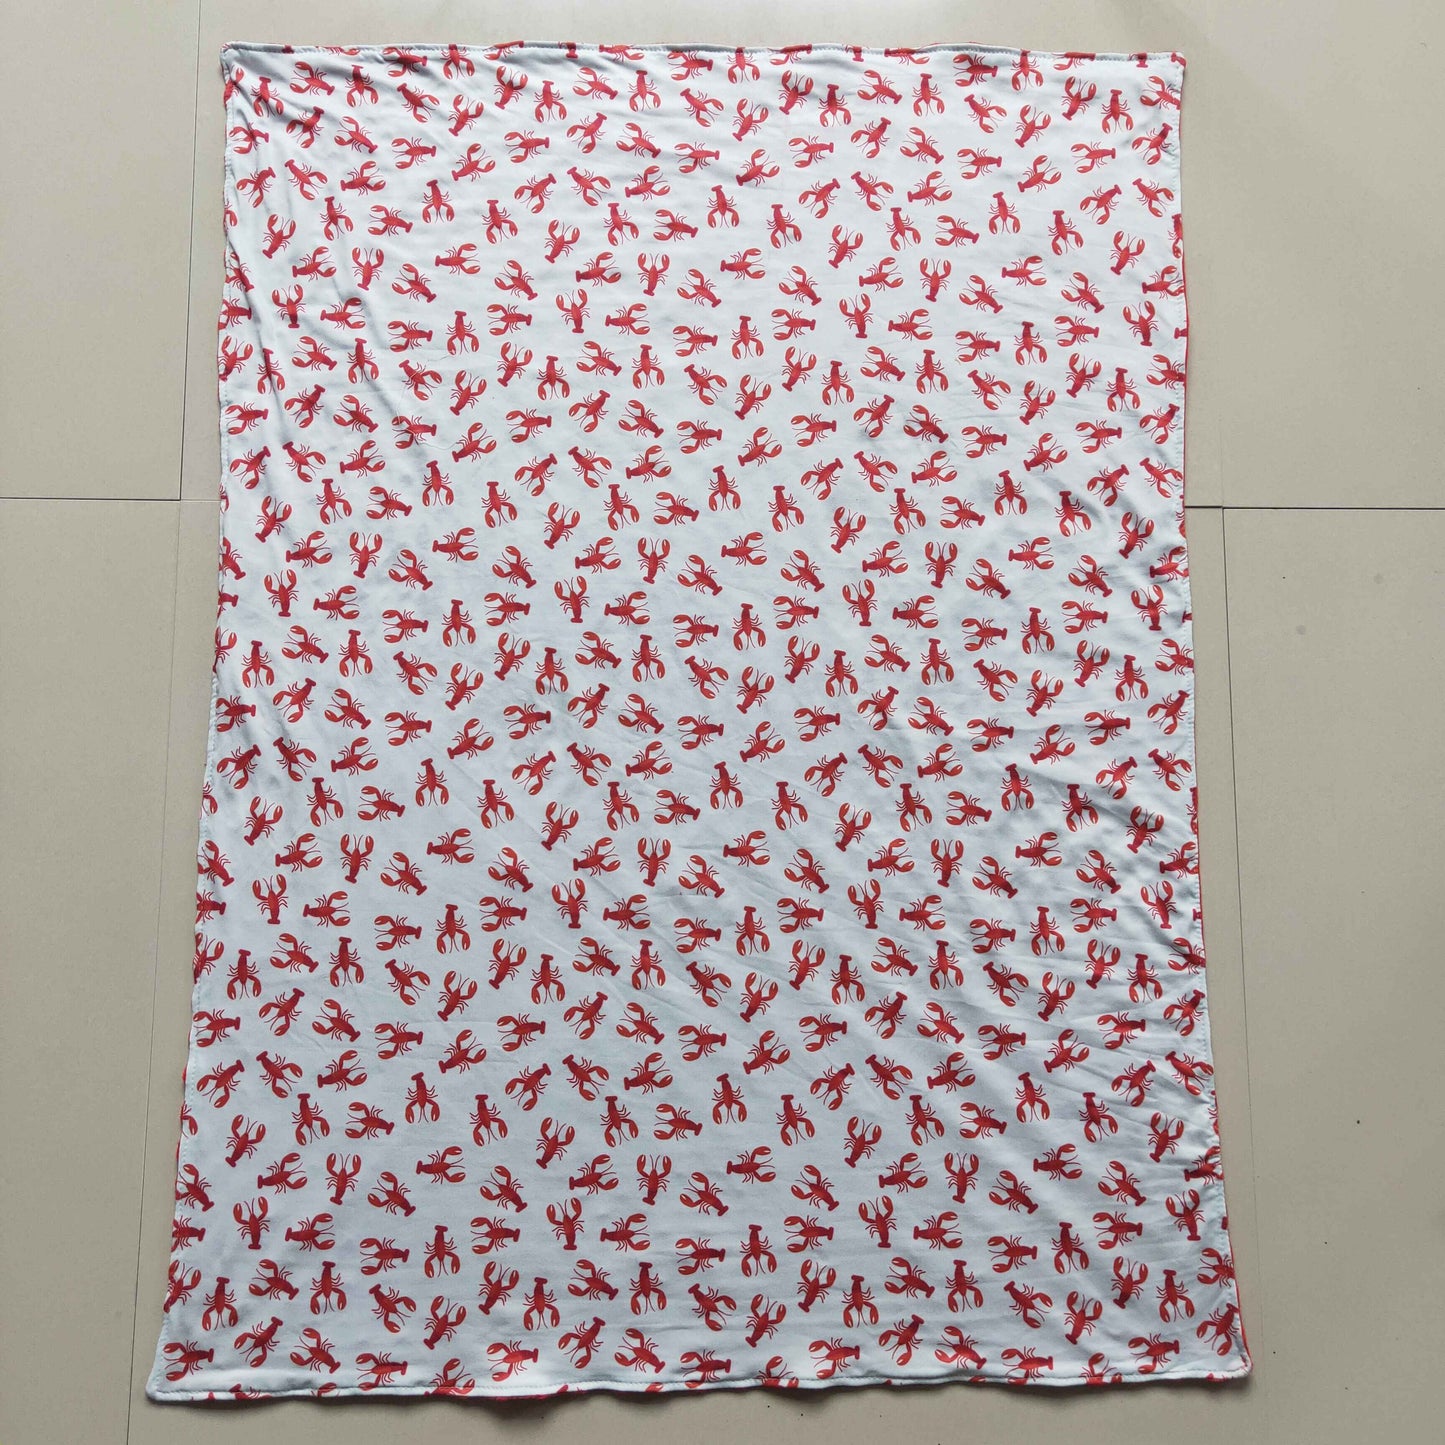 BL0034 infants baby crawfish print and red velvet blacket with 29*43 inches